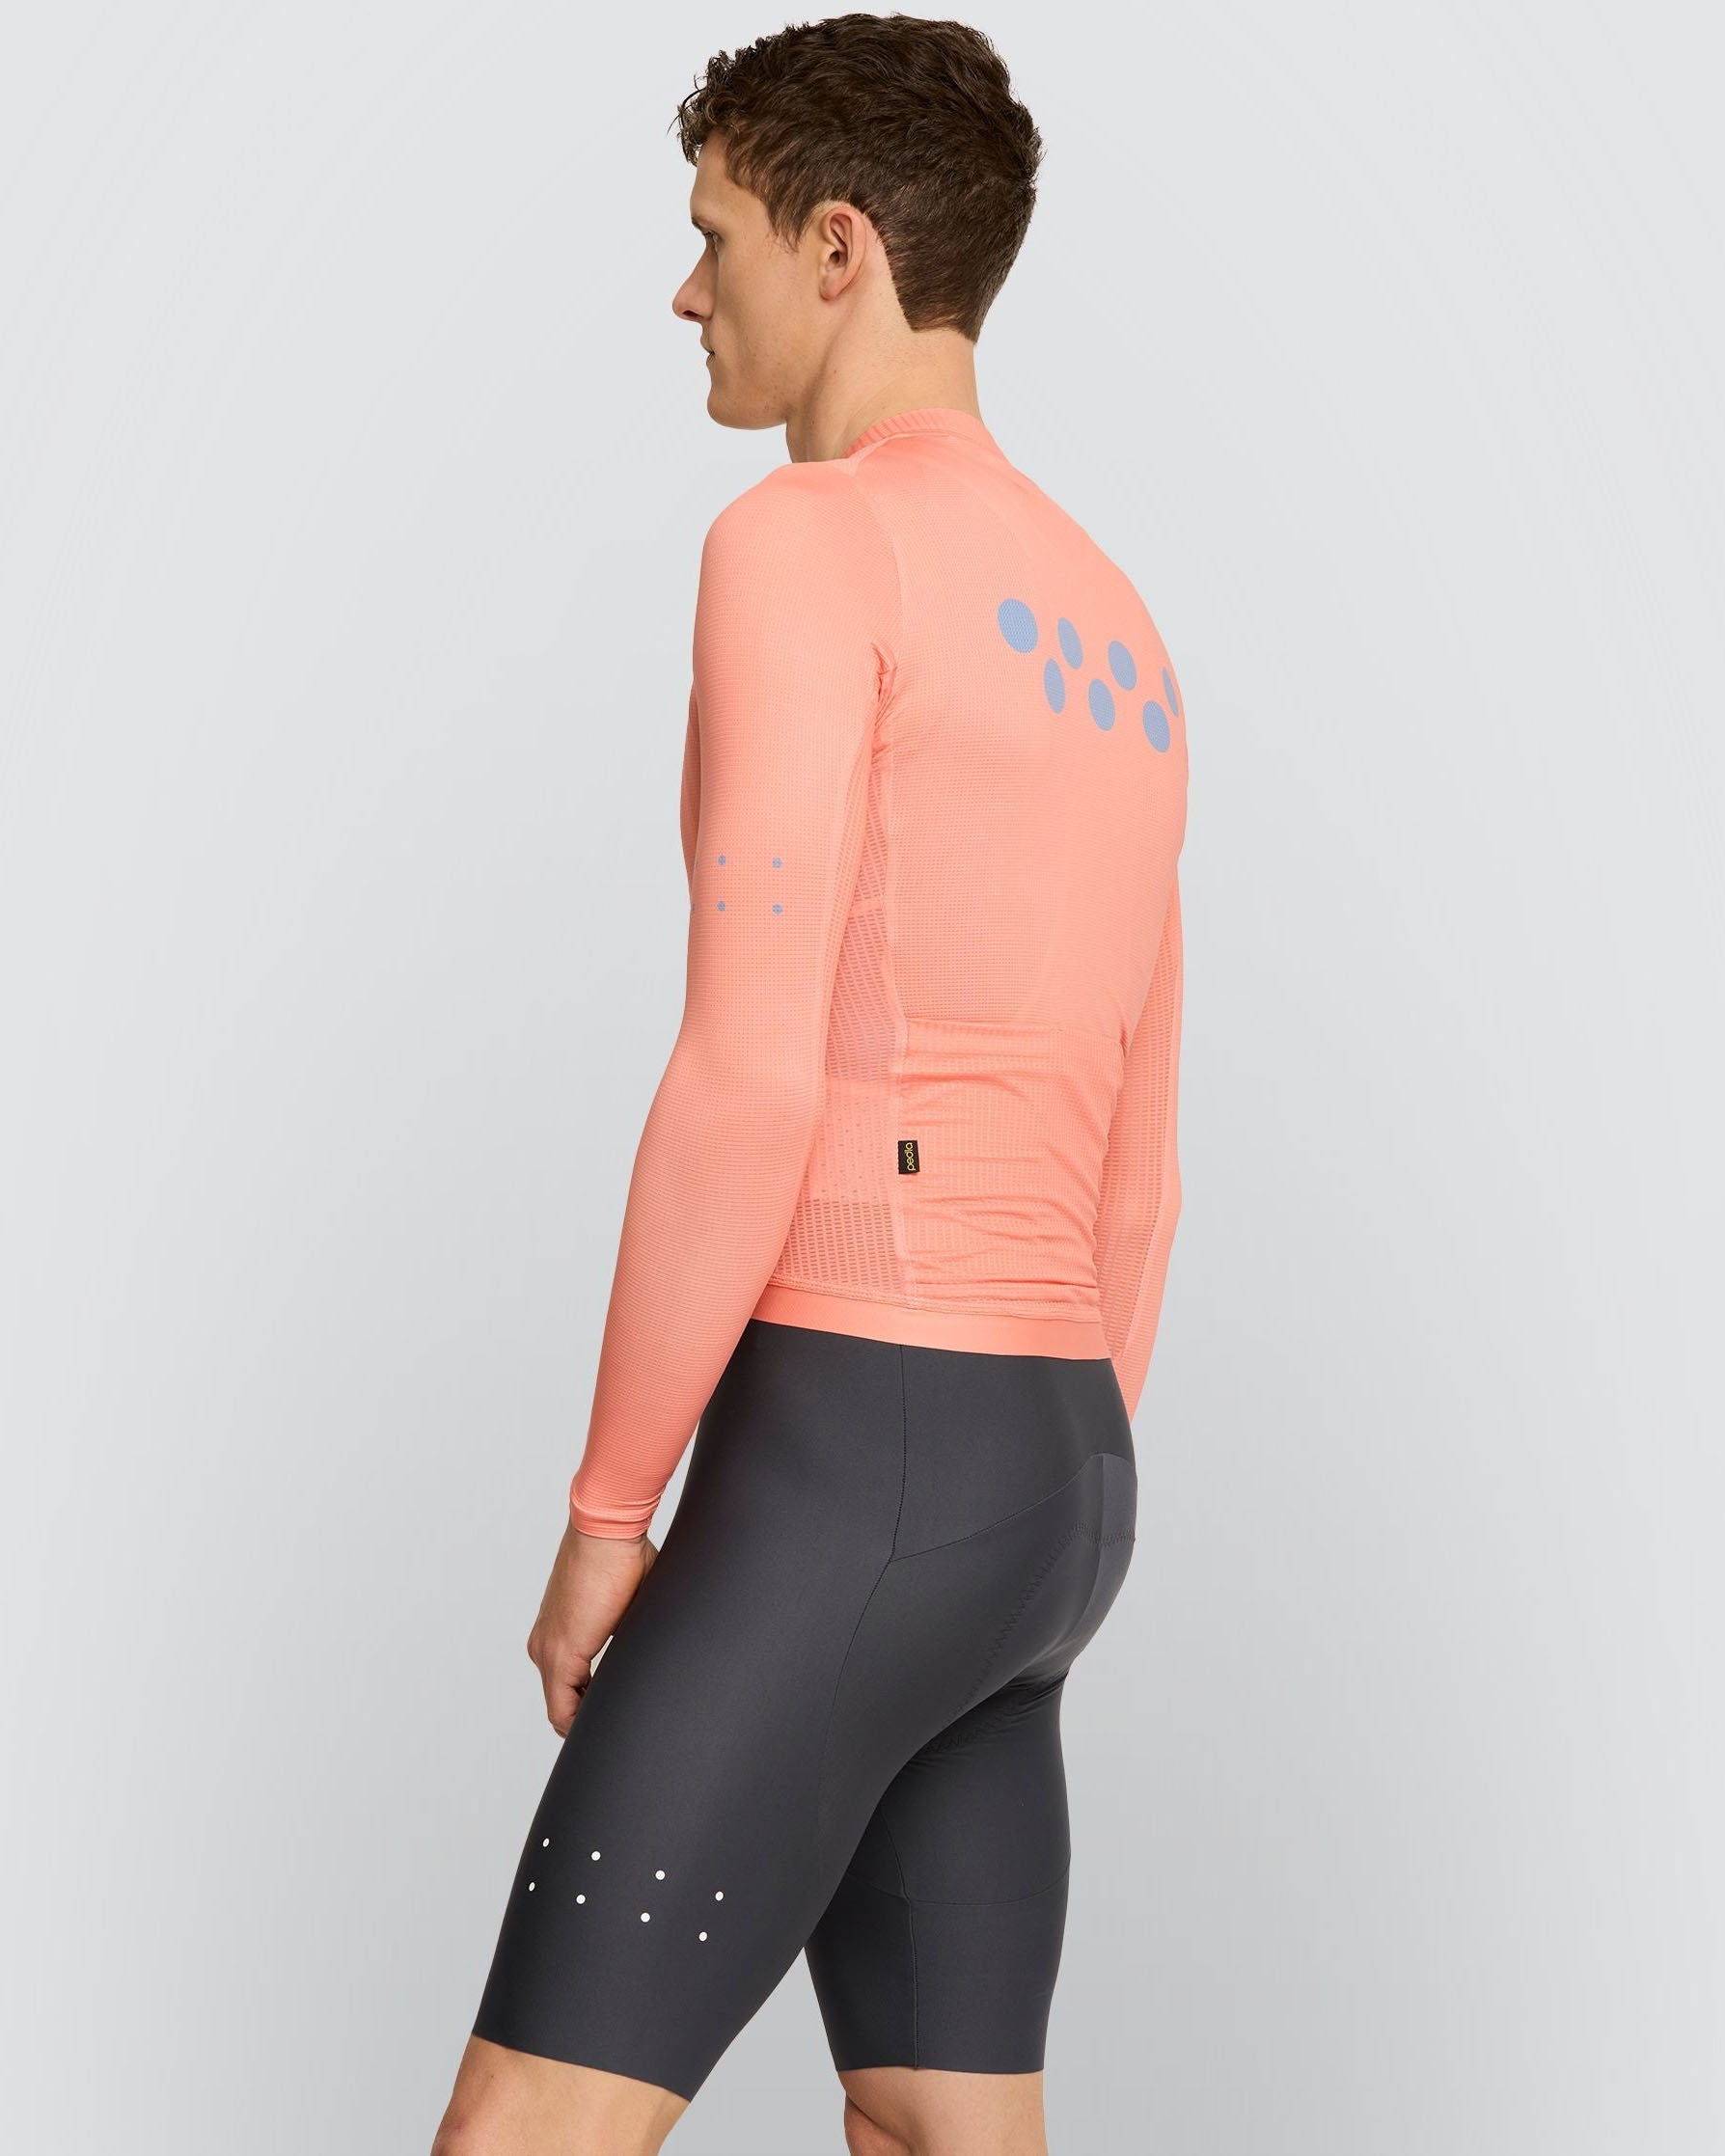 Elements Air Long Sleeve Jersey